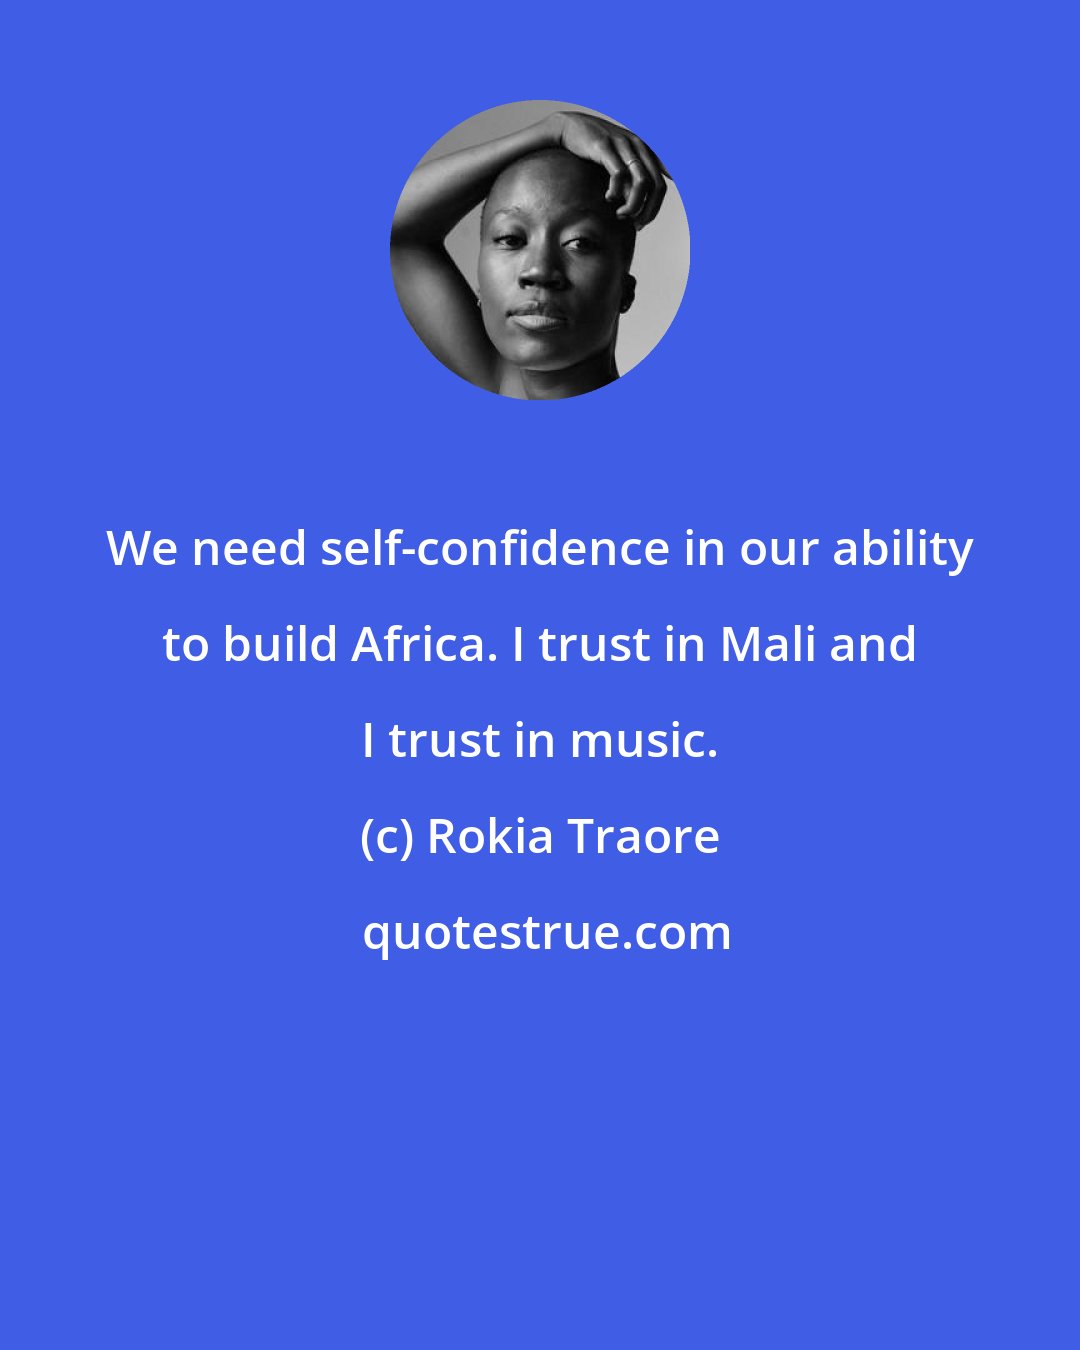 Rokia Traore: We need self-confidence in our ability to build Africa. I trust in Mali and I trust in music.